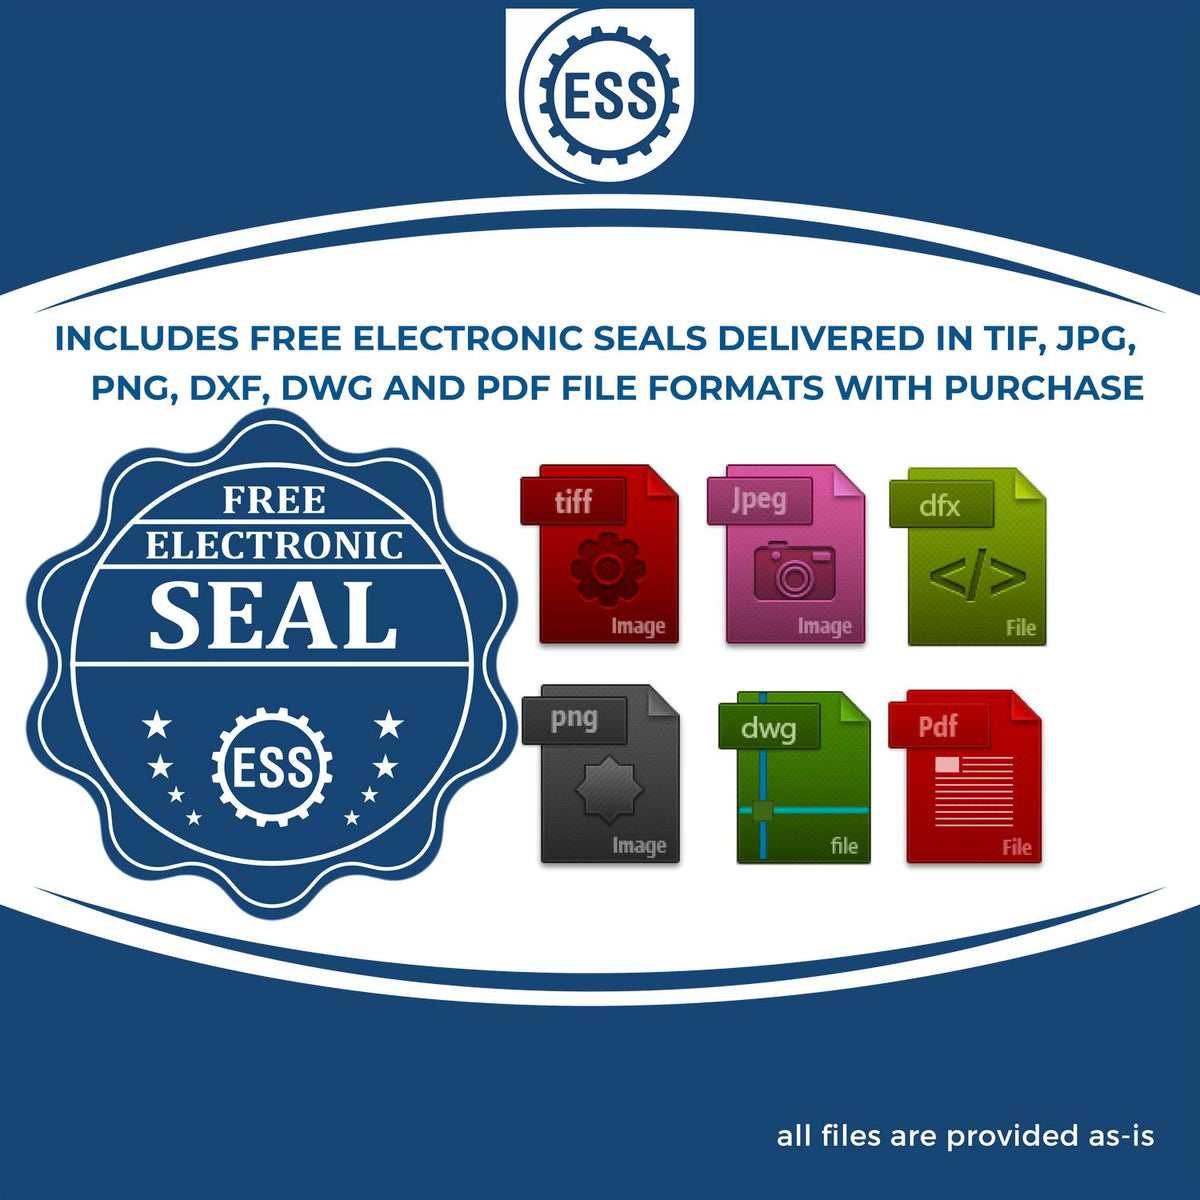 An infographic for the free electronic seal for the Gift Mississippi Landscape Architect Seal illustrating the different file type icons such as DXF, DWG, TIF, JPG and PNG.